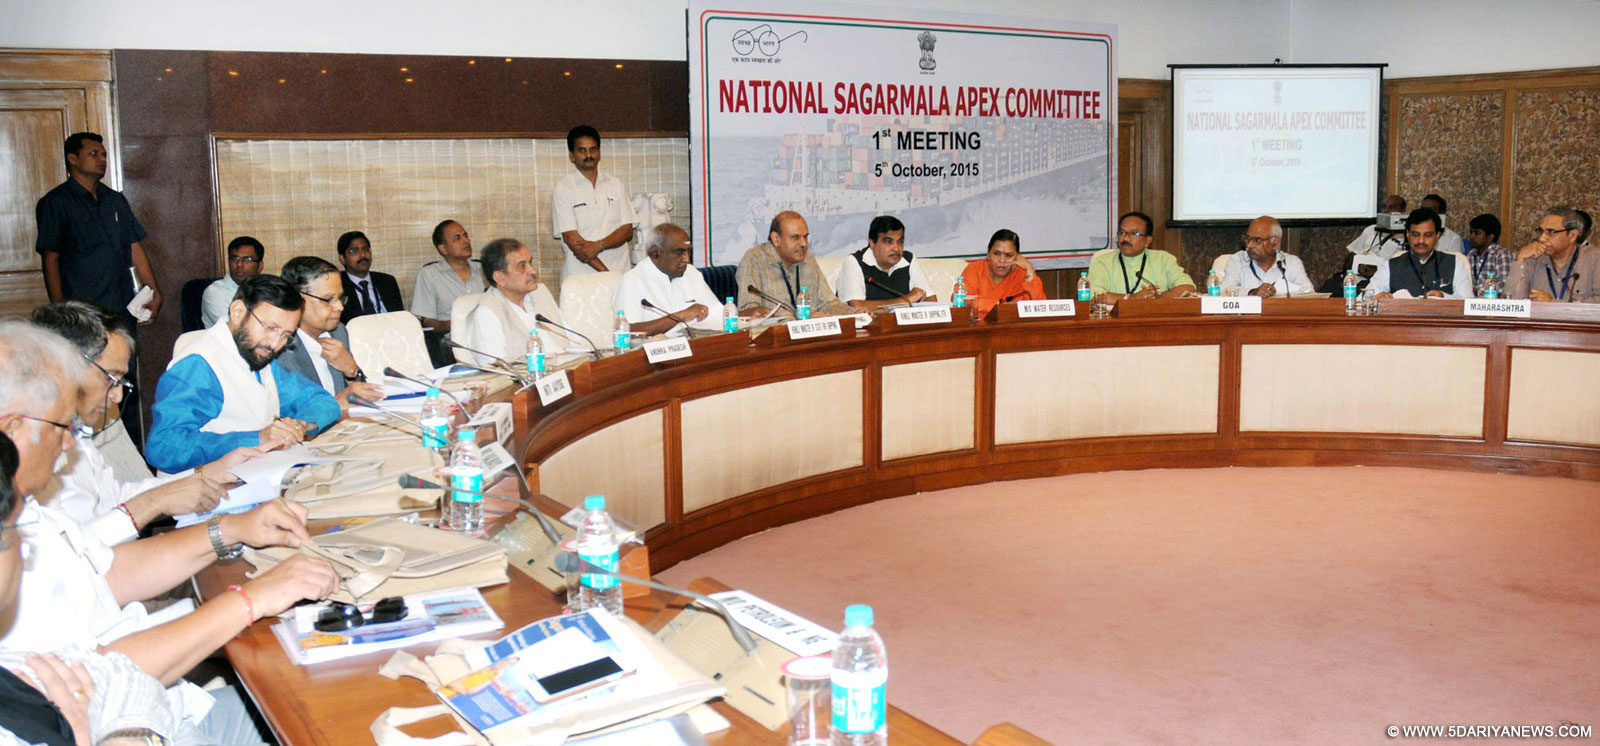 The Union Minister for Road Transport & Highways and Shipping, Shri Nitin Gadkari chairing the 1st National Sagarmala Apex Committee Meeting, in New Delhi on October 05, 2015.